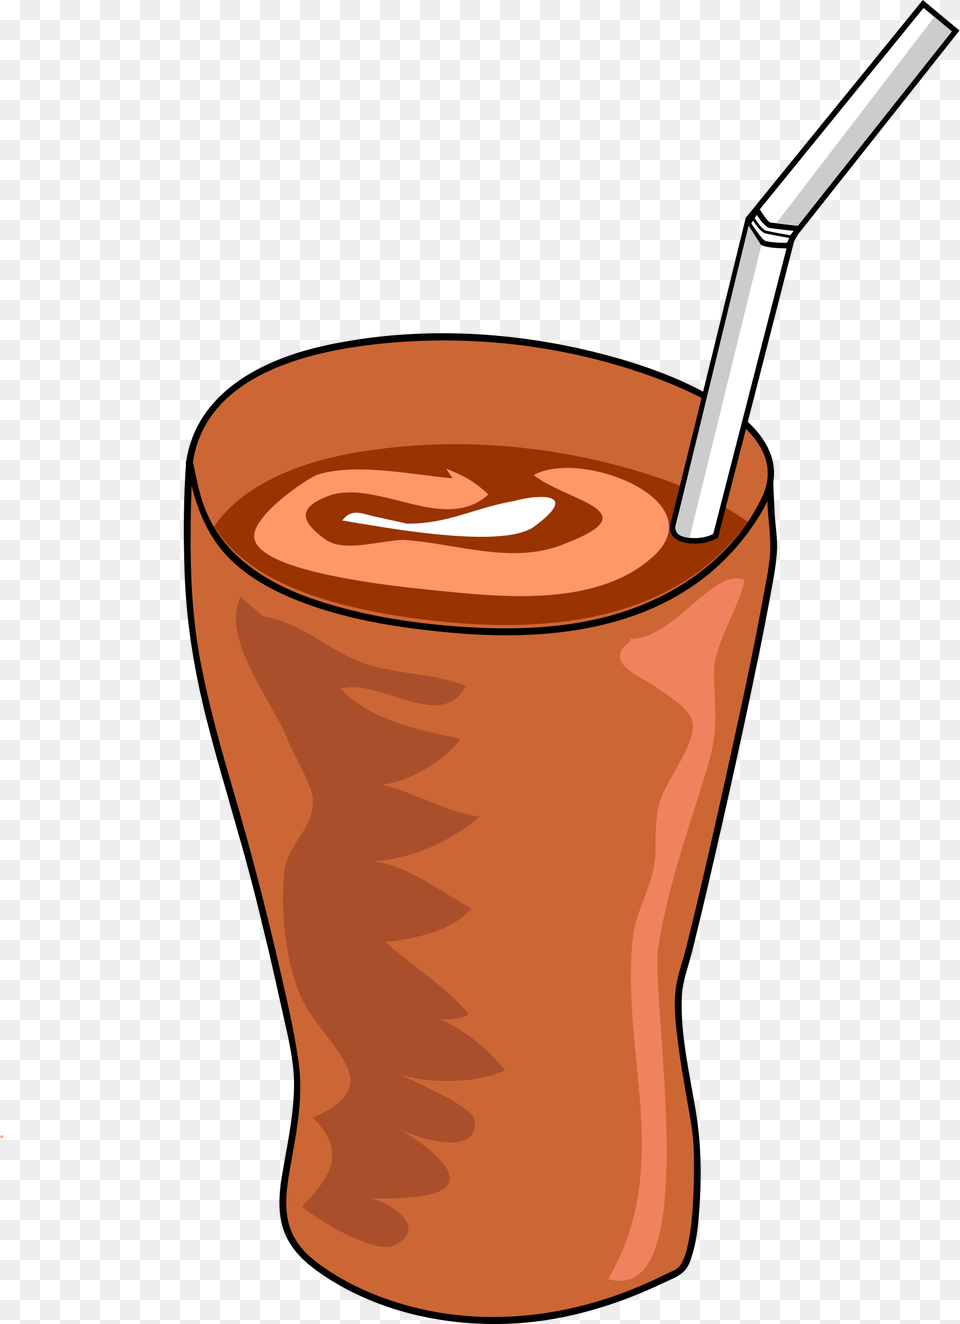 Non Copyrighted Clip Art Of Reminder Cold Coffee Vector, Beverage, Juice, Smoothie, Smoke Pipe Free Transparent Png